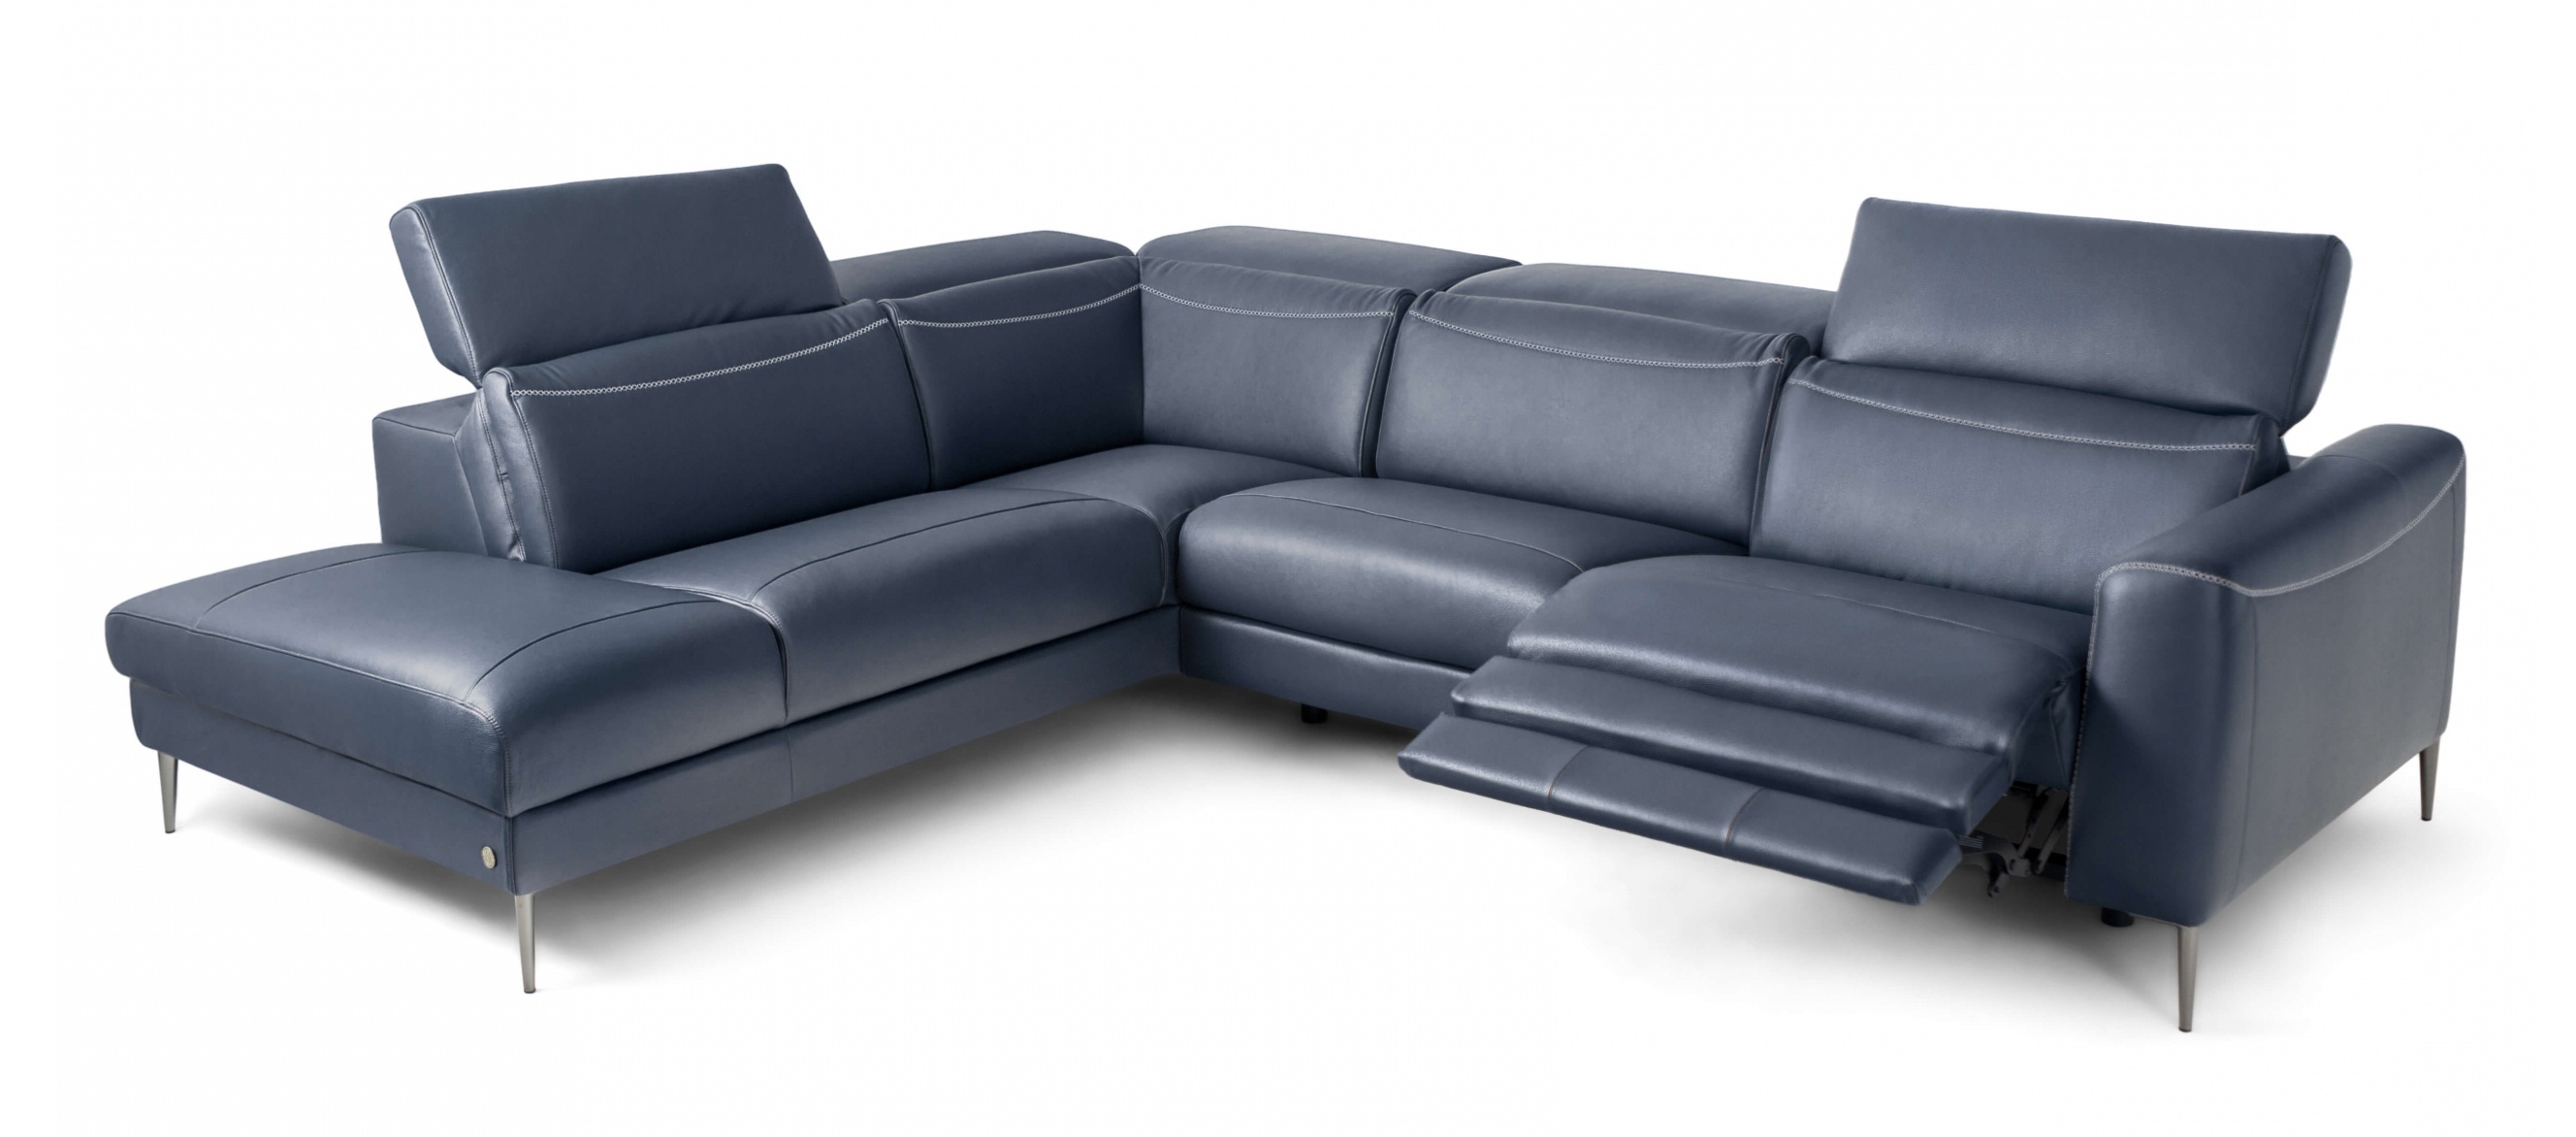 Pauline Leather Sectional Sofa with One Power Recliners in Blue